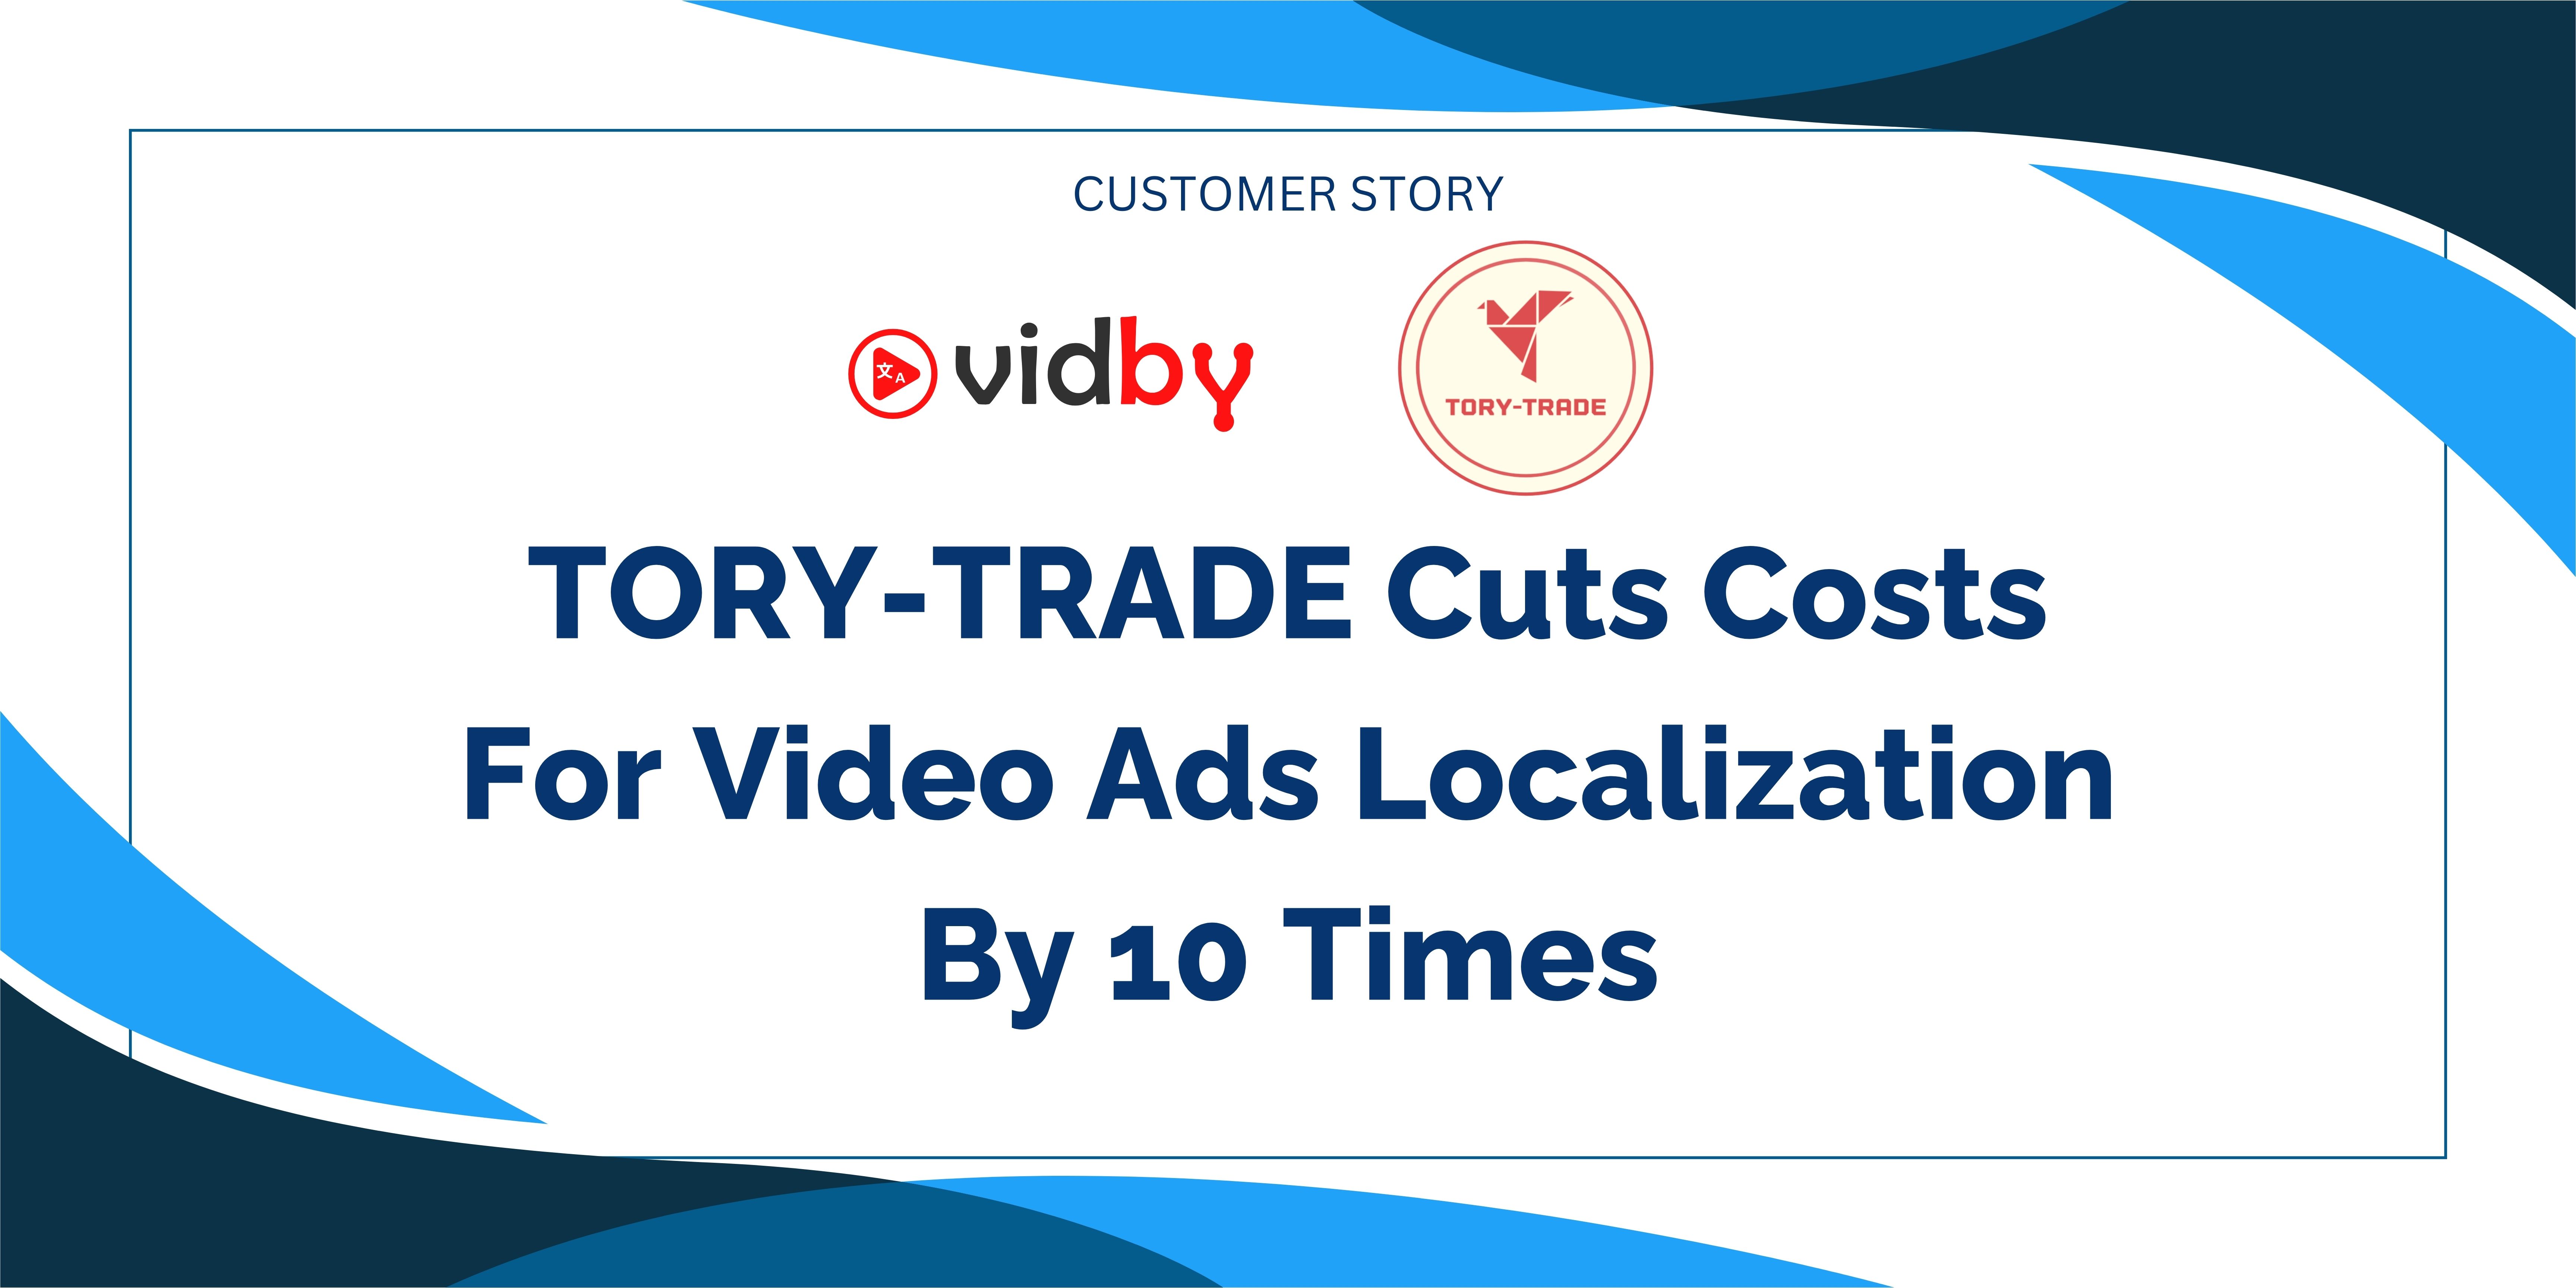 TORY-TRADE Cuts Costs For Video Ads Localization